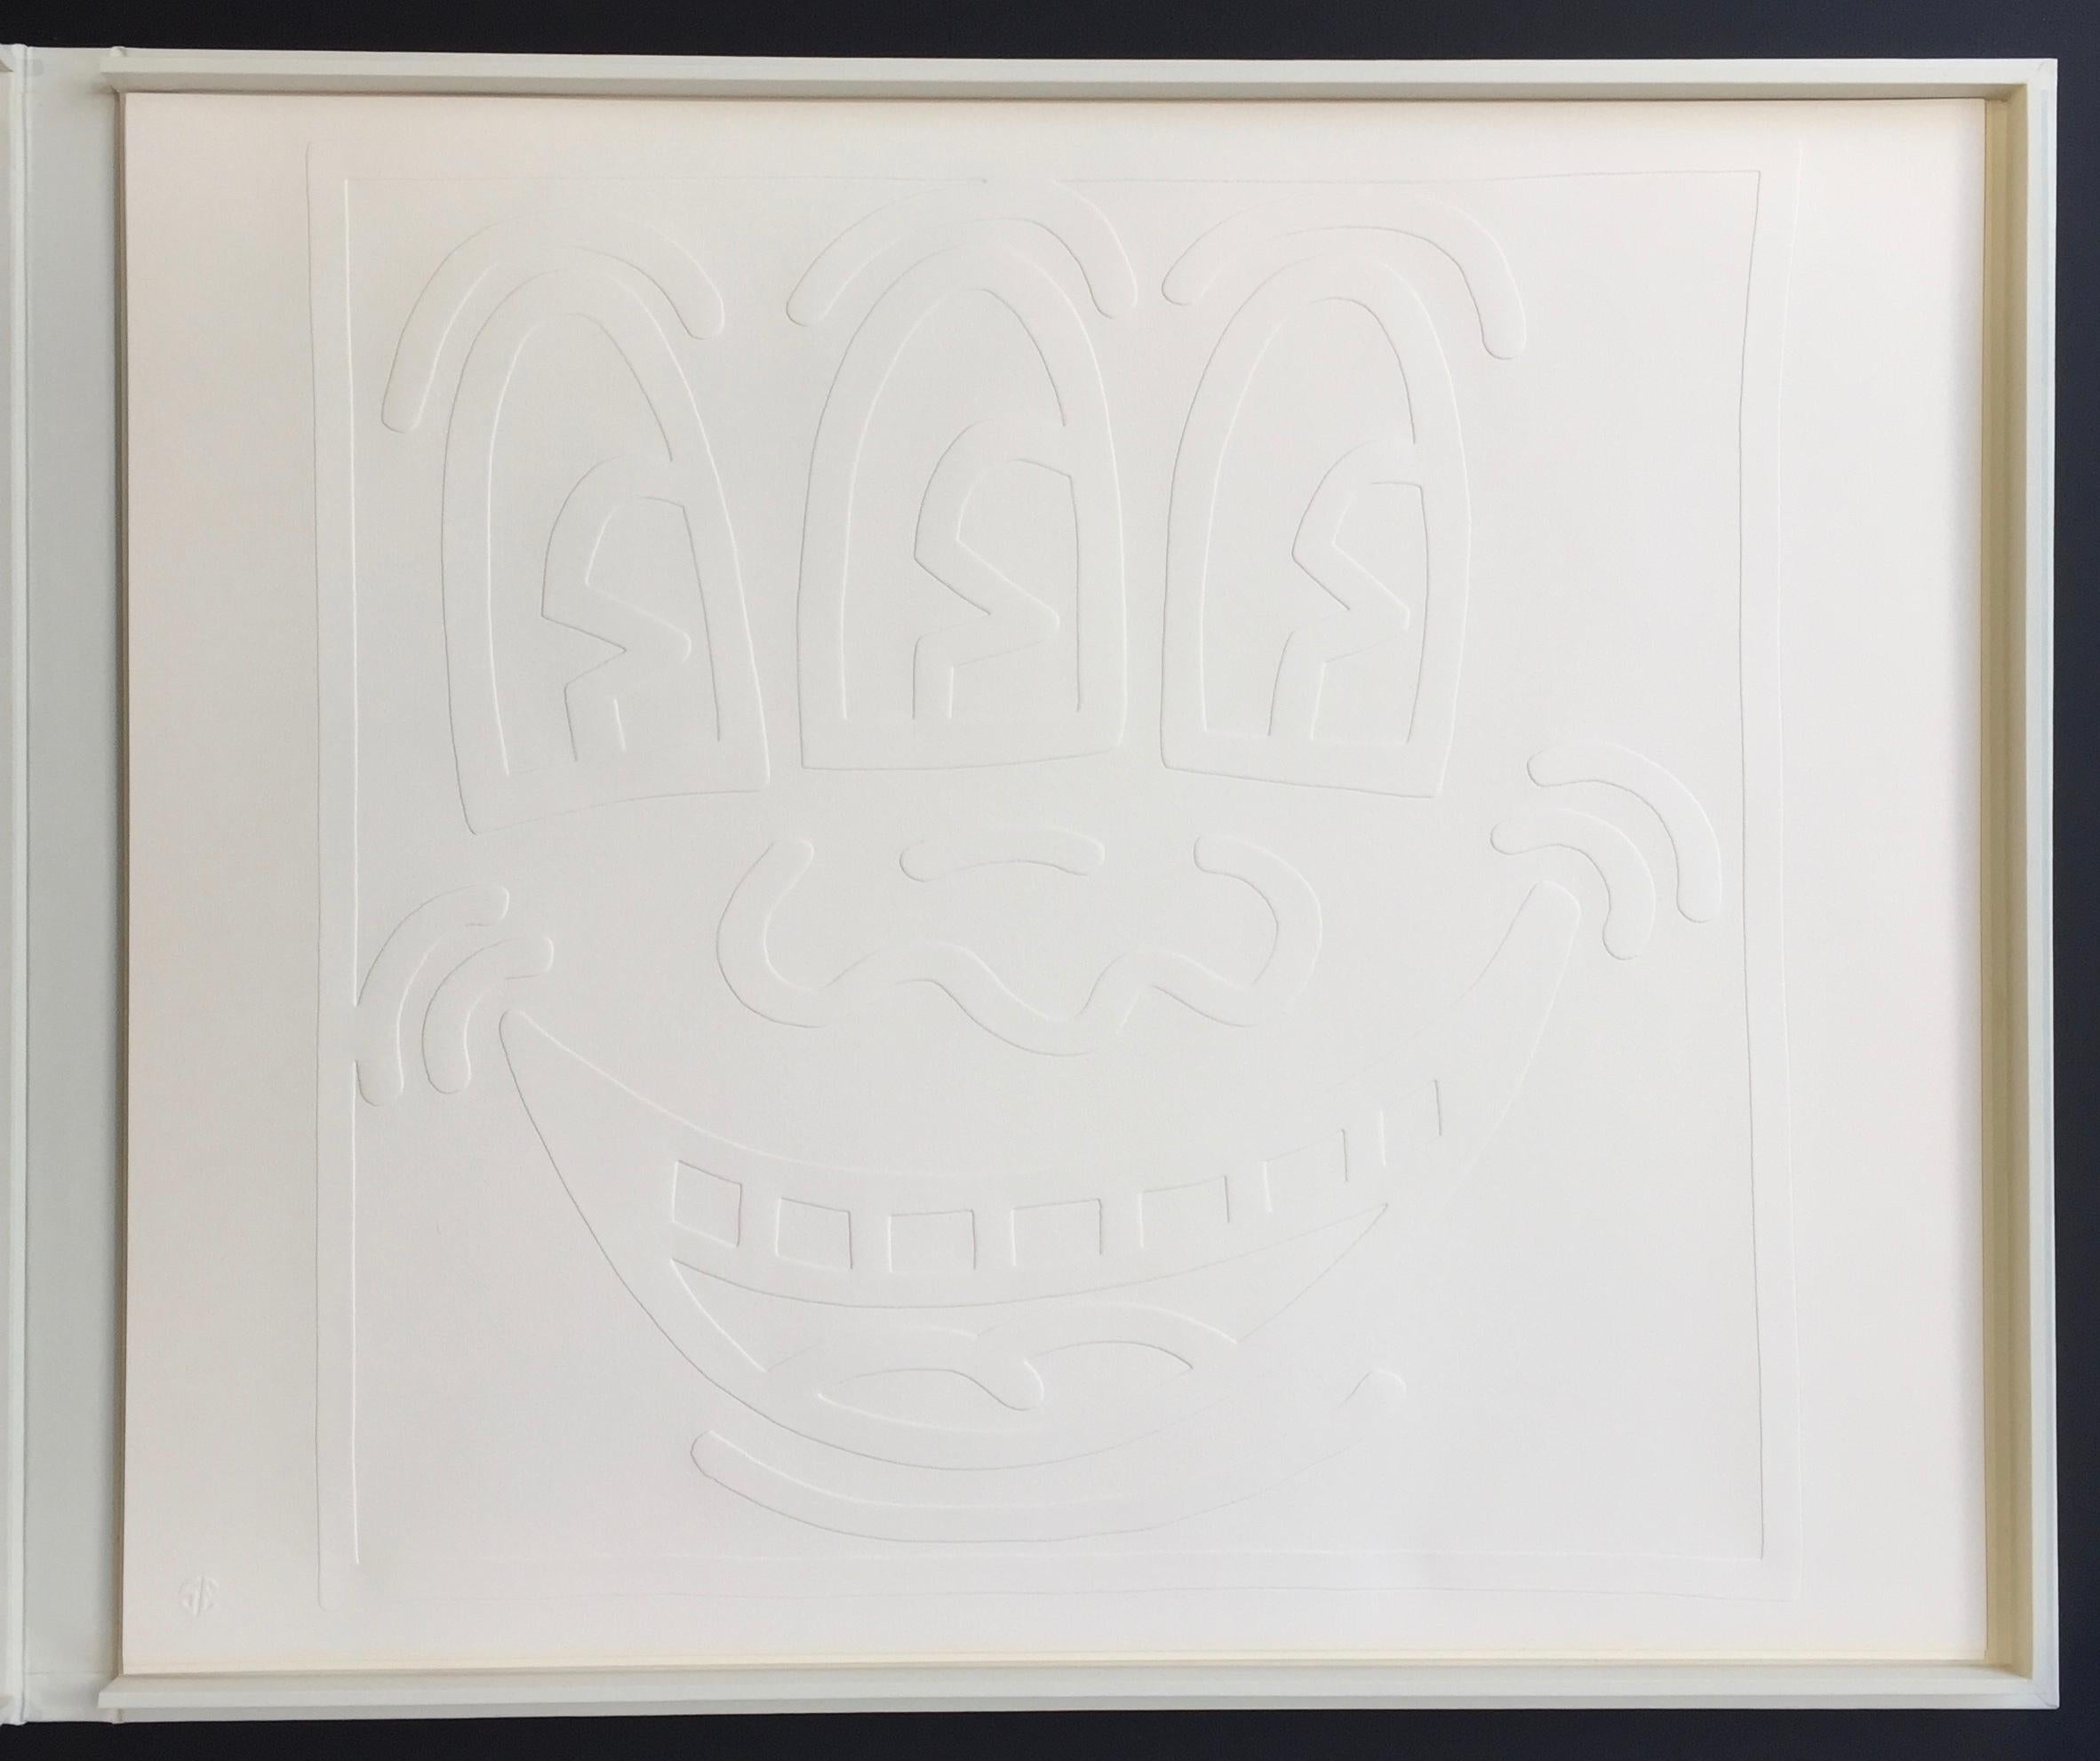 White Icon (3 Eyed Monster) - Print by Keith Haring